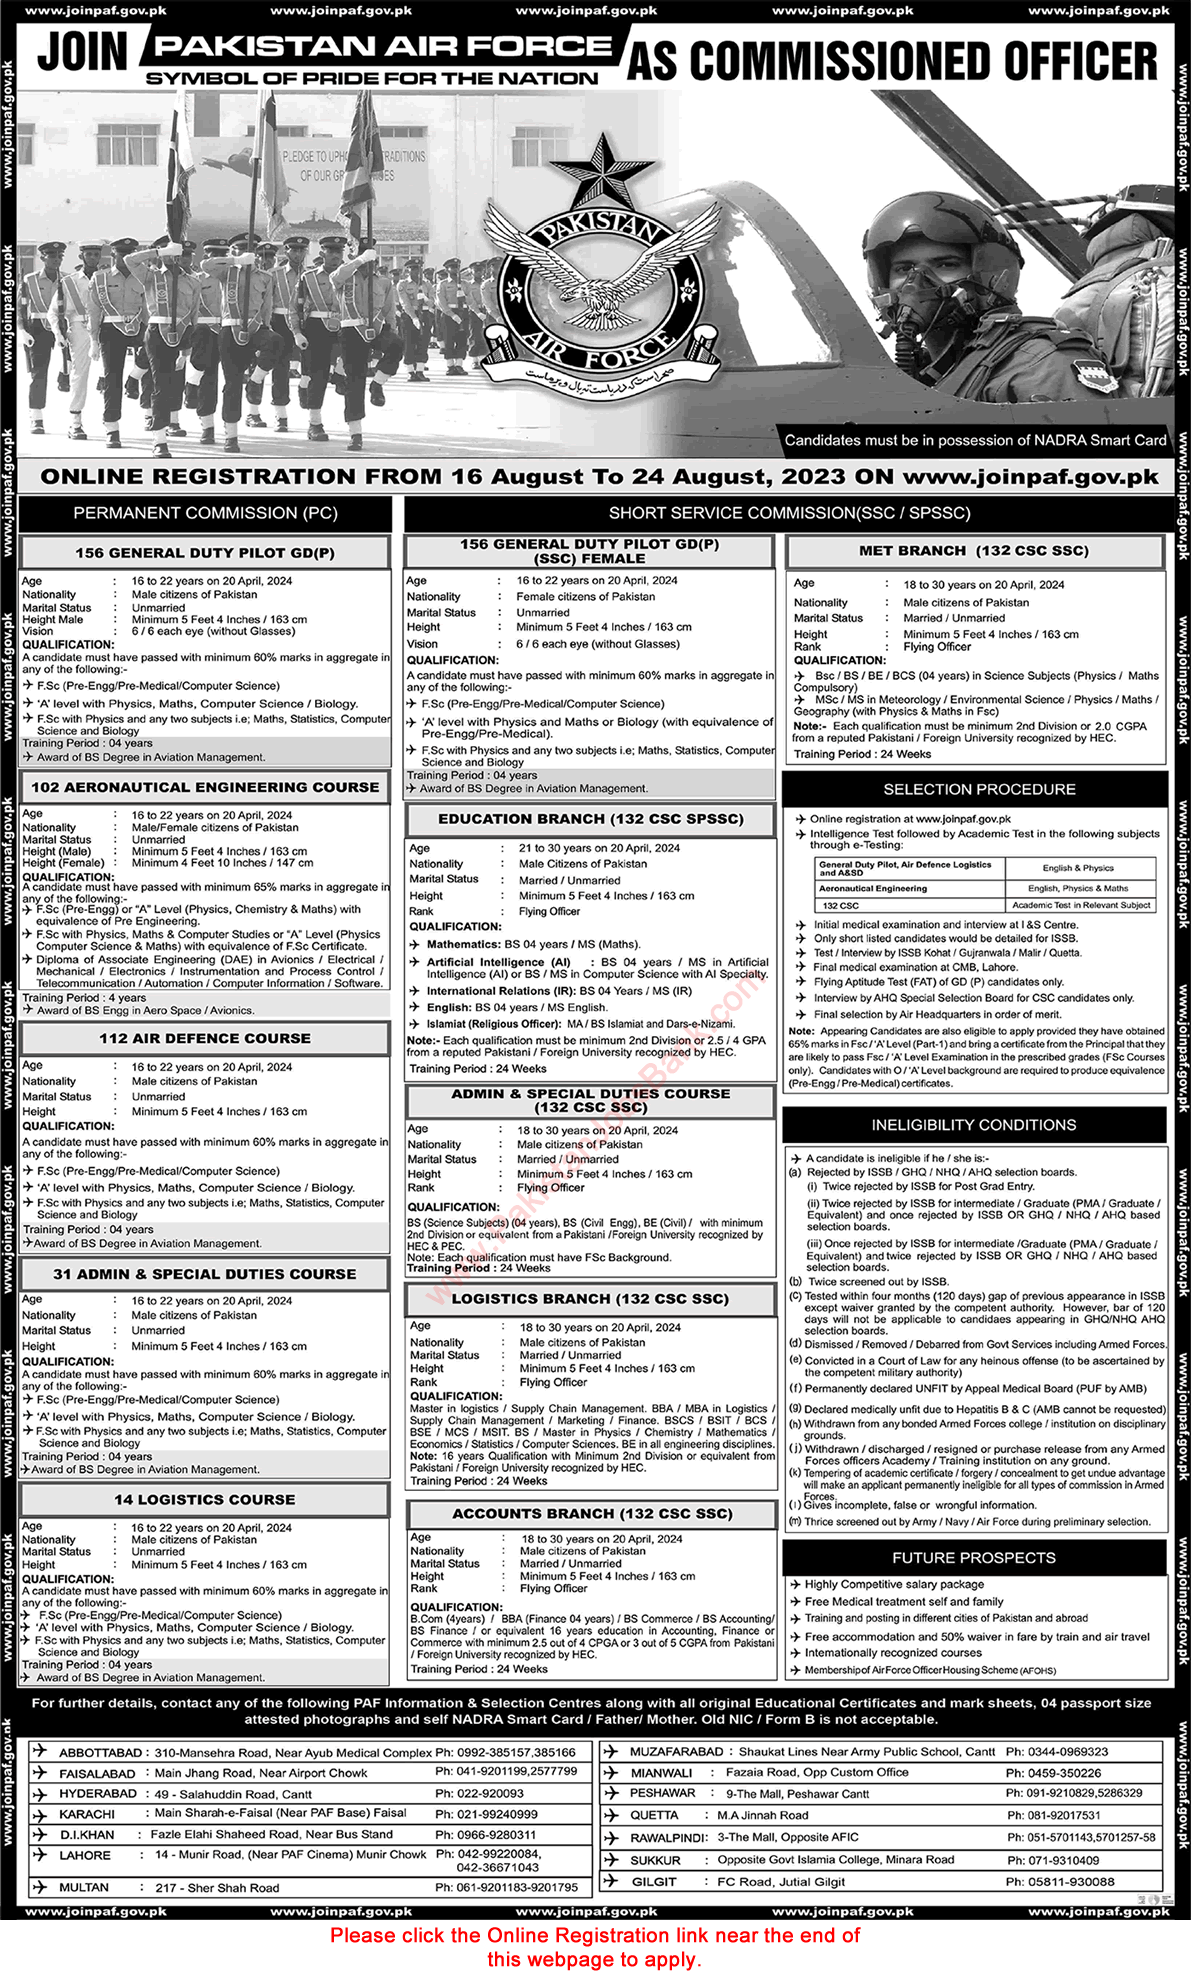 Join Pakistan Air Force as Commissioned Officer August 2023 Online Registration SSC, SPSSC & Permanent Commission Latest